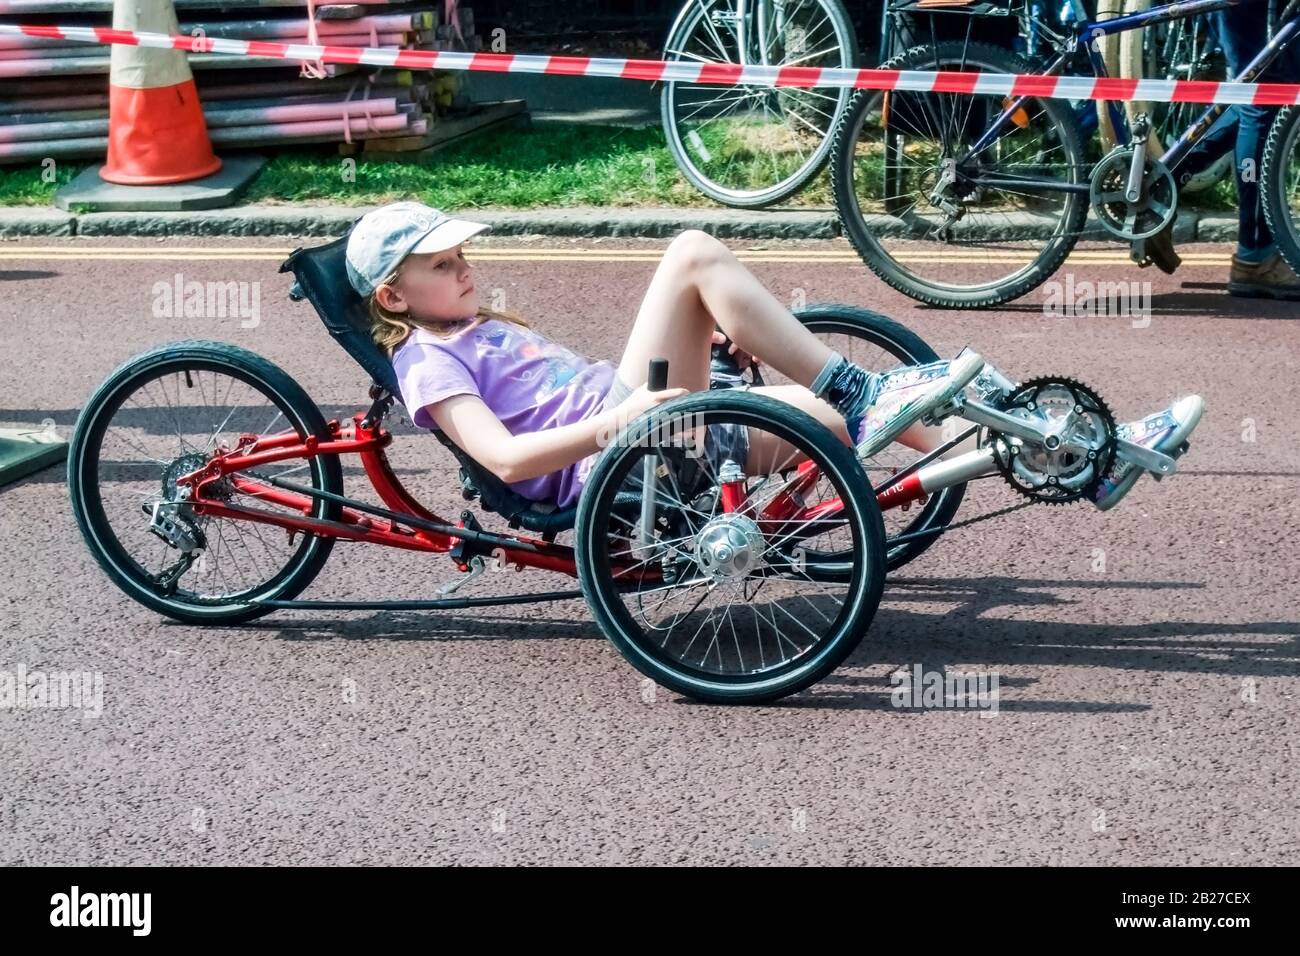 Nine year-old girl on a recumbent tricycle at a cycling event, London, UK Stock Photo